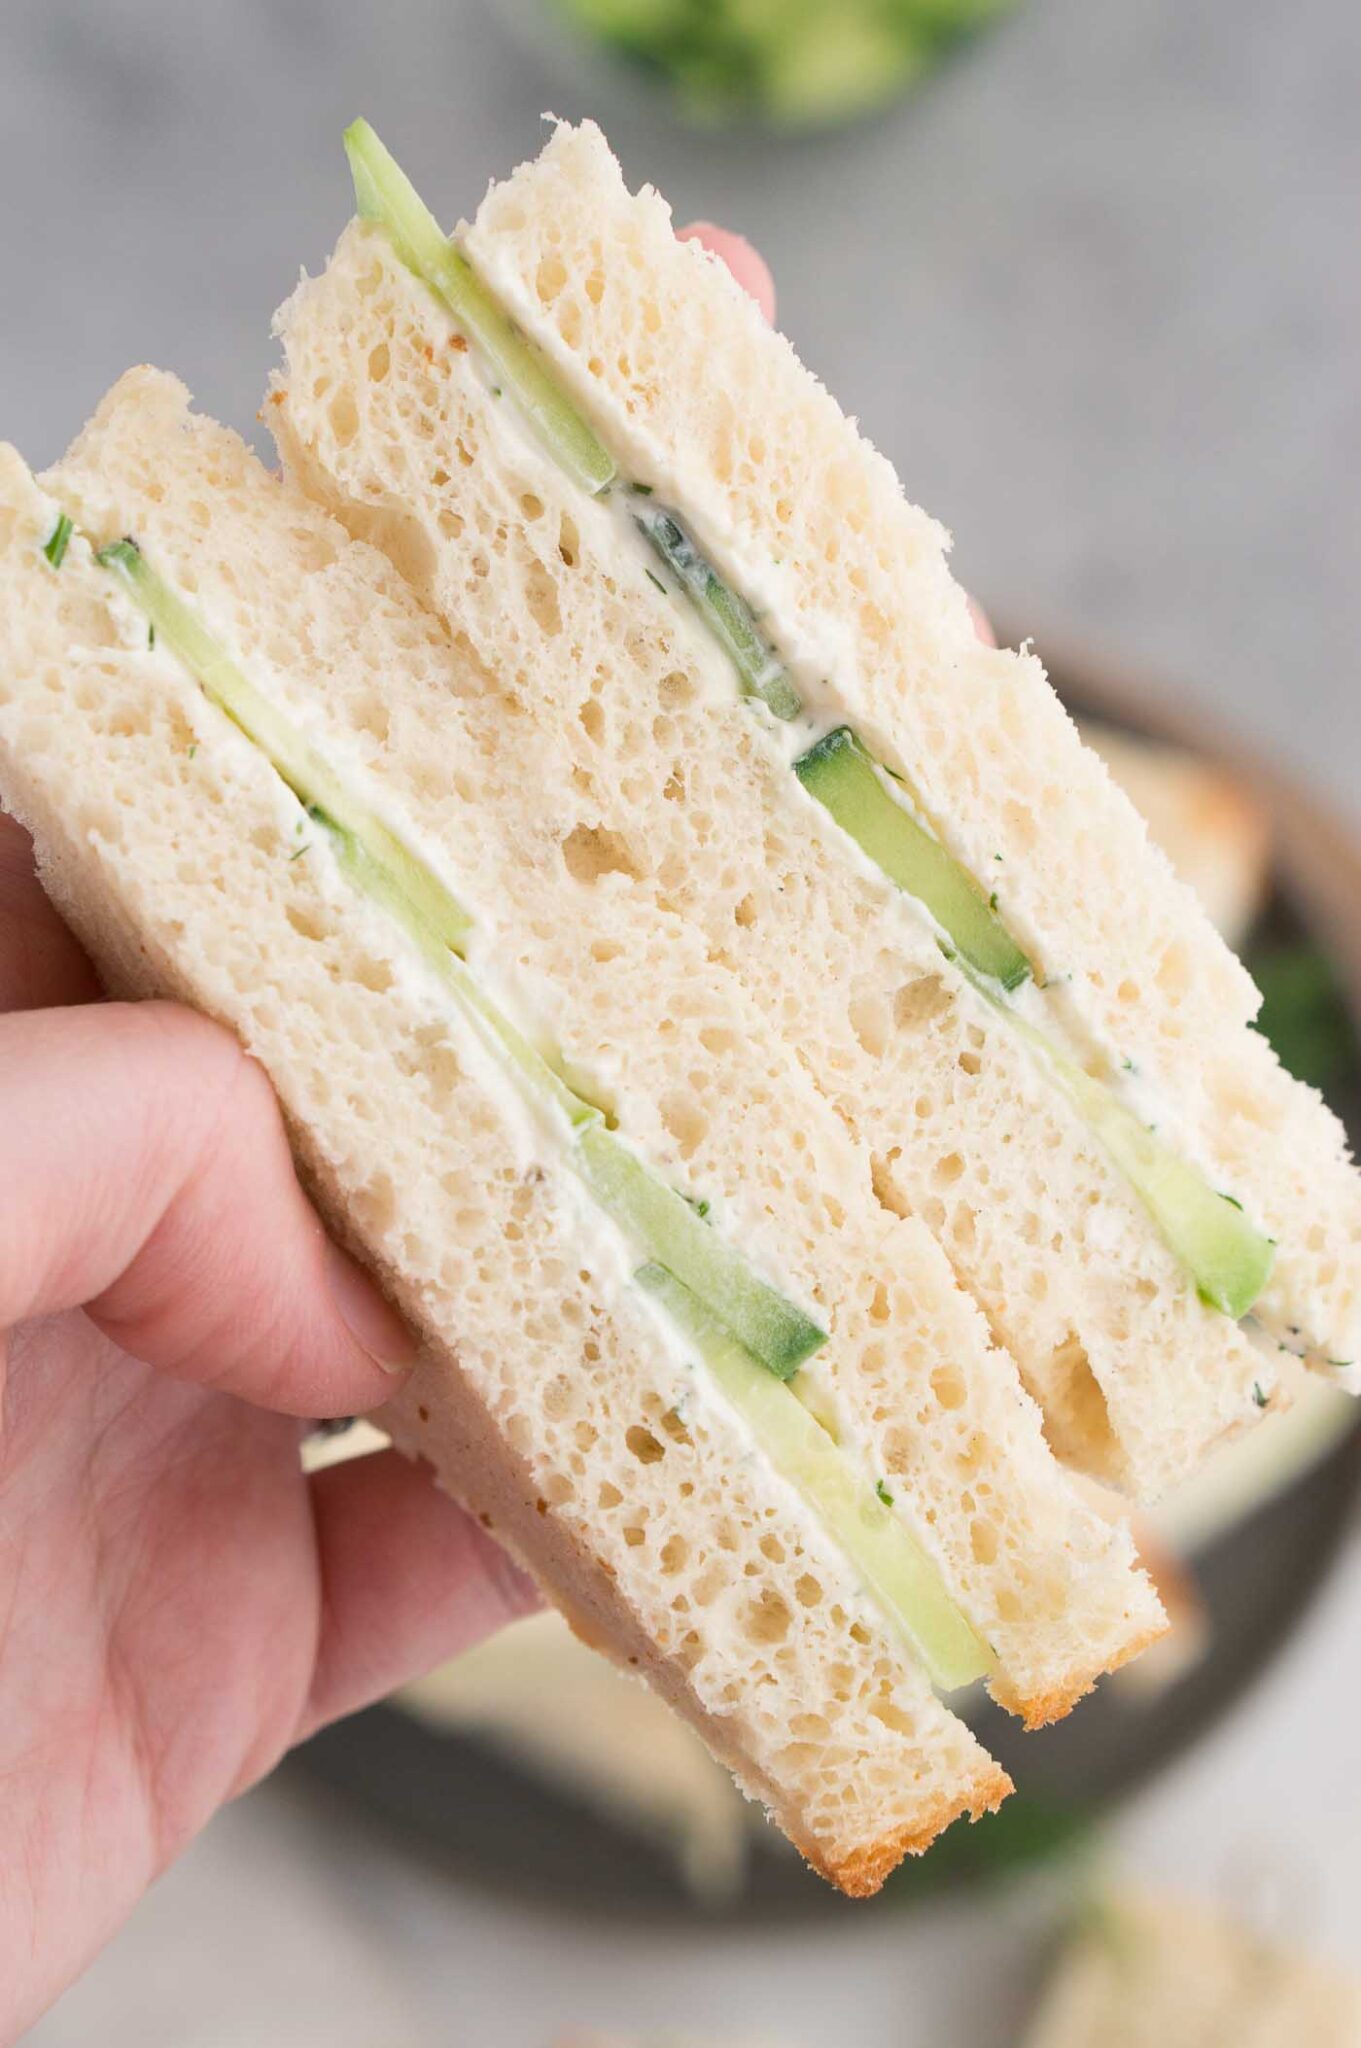 close up image of sandwich made cream cheese and cucumbers